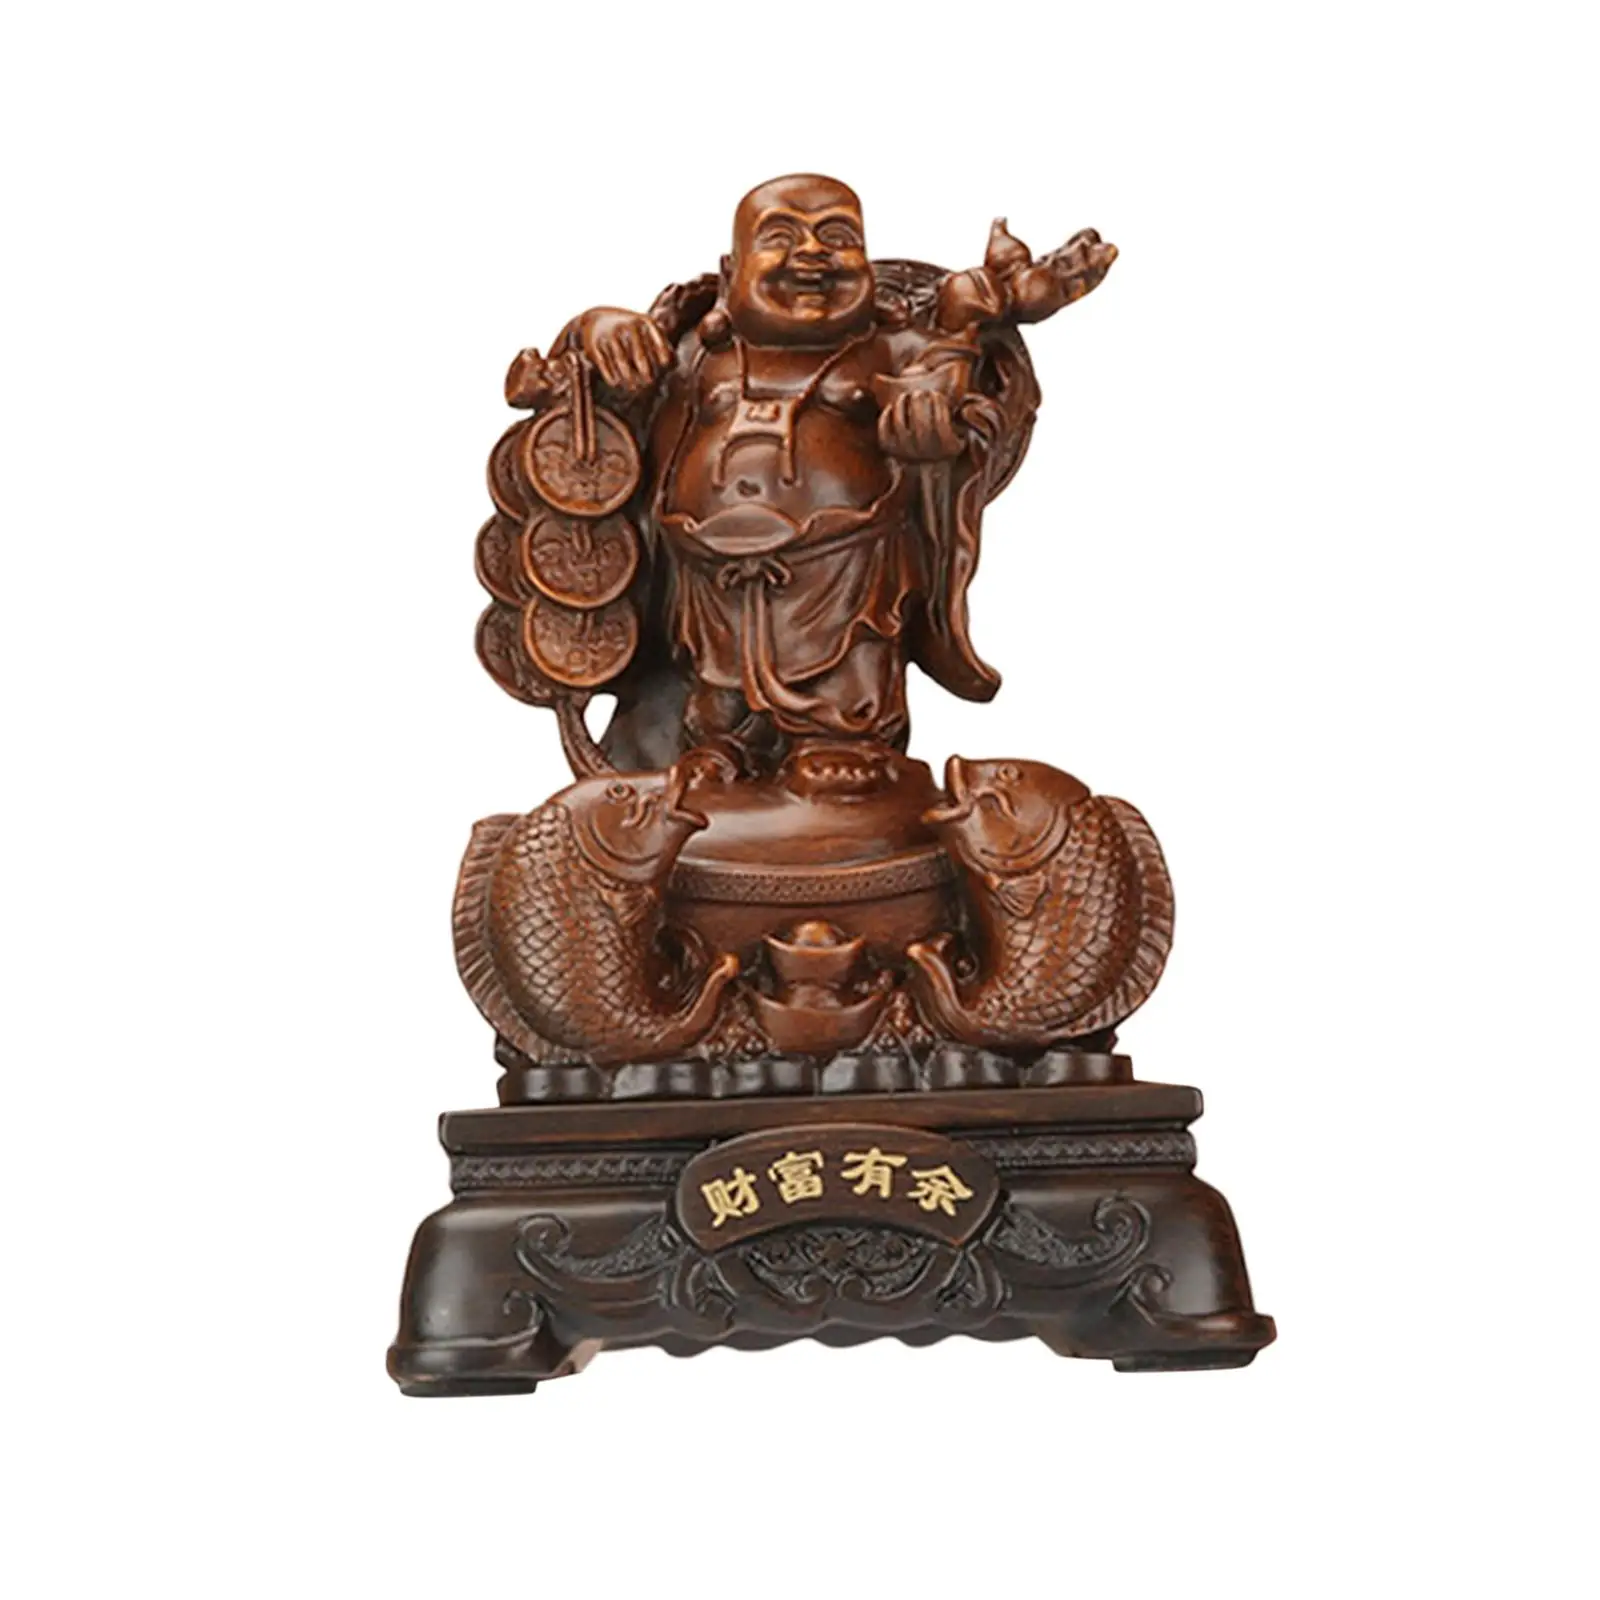 Buddha Sculpture Artwork Smiling Resin Feng Shui Chinese Buddha Statue Buddha Figurine for Car Office Garden Tabletop Decoration